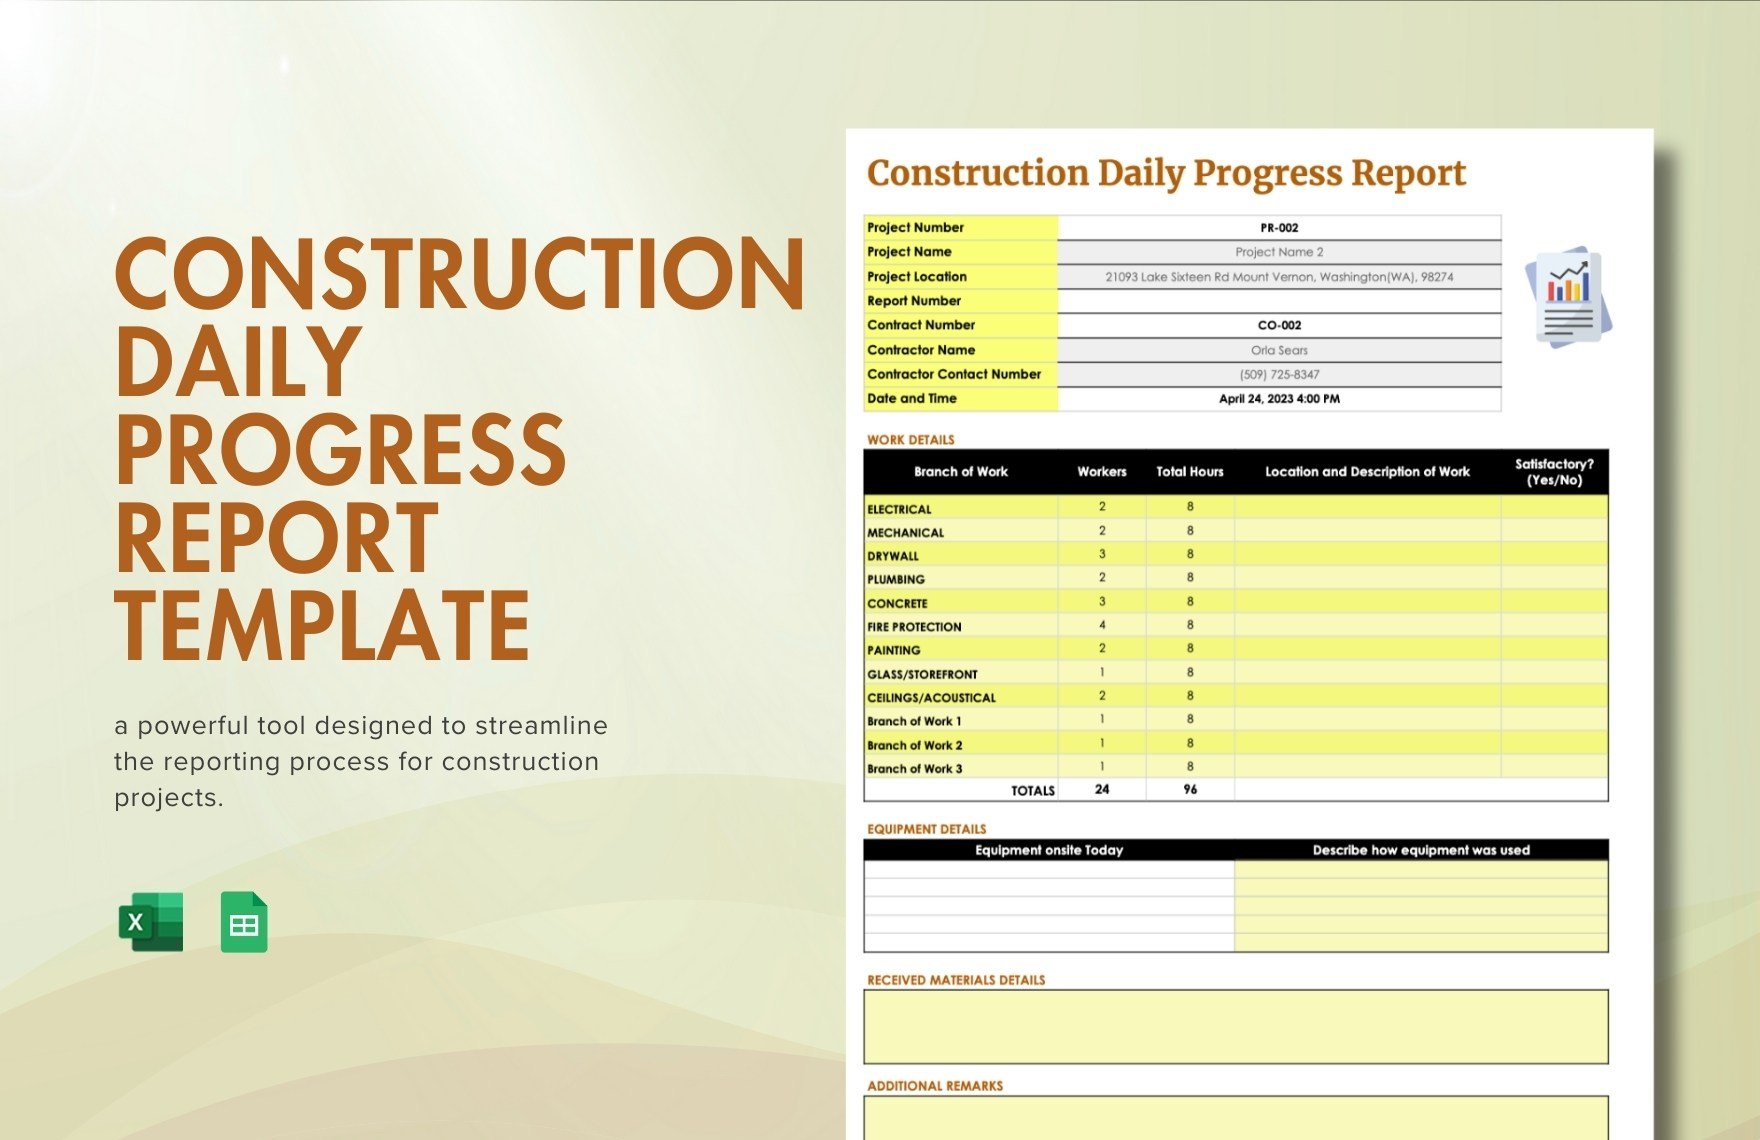 Construction Daily Progress Report Template in Excel, Google Sheets